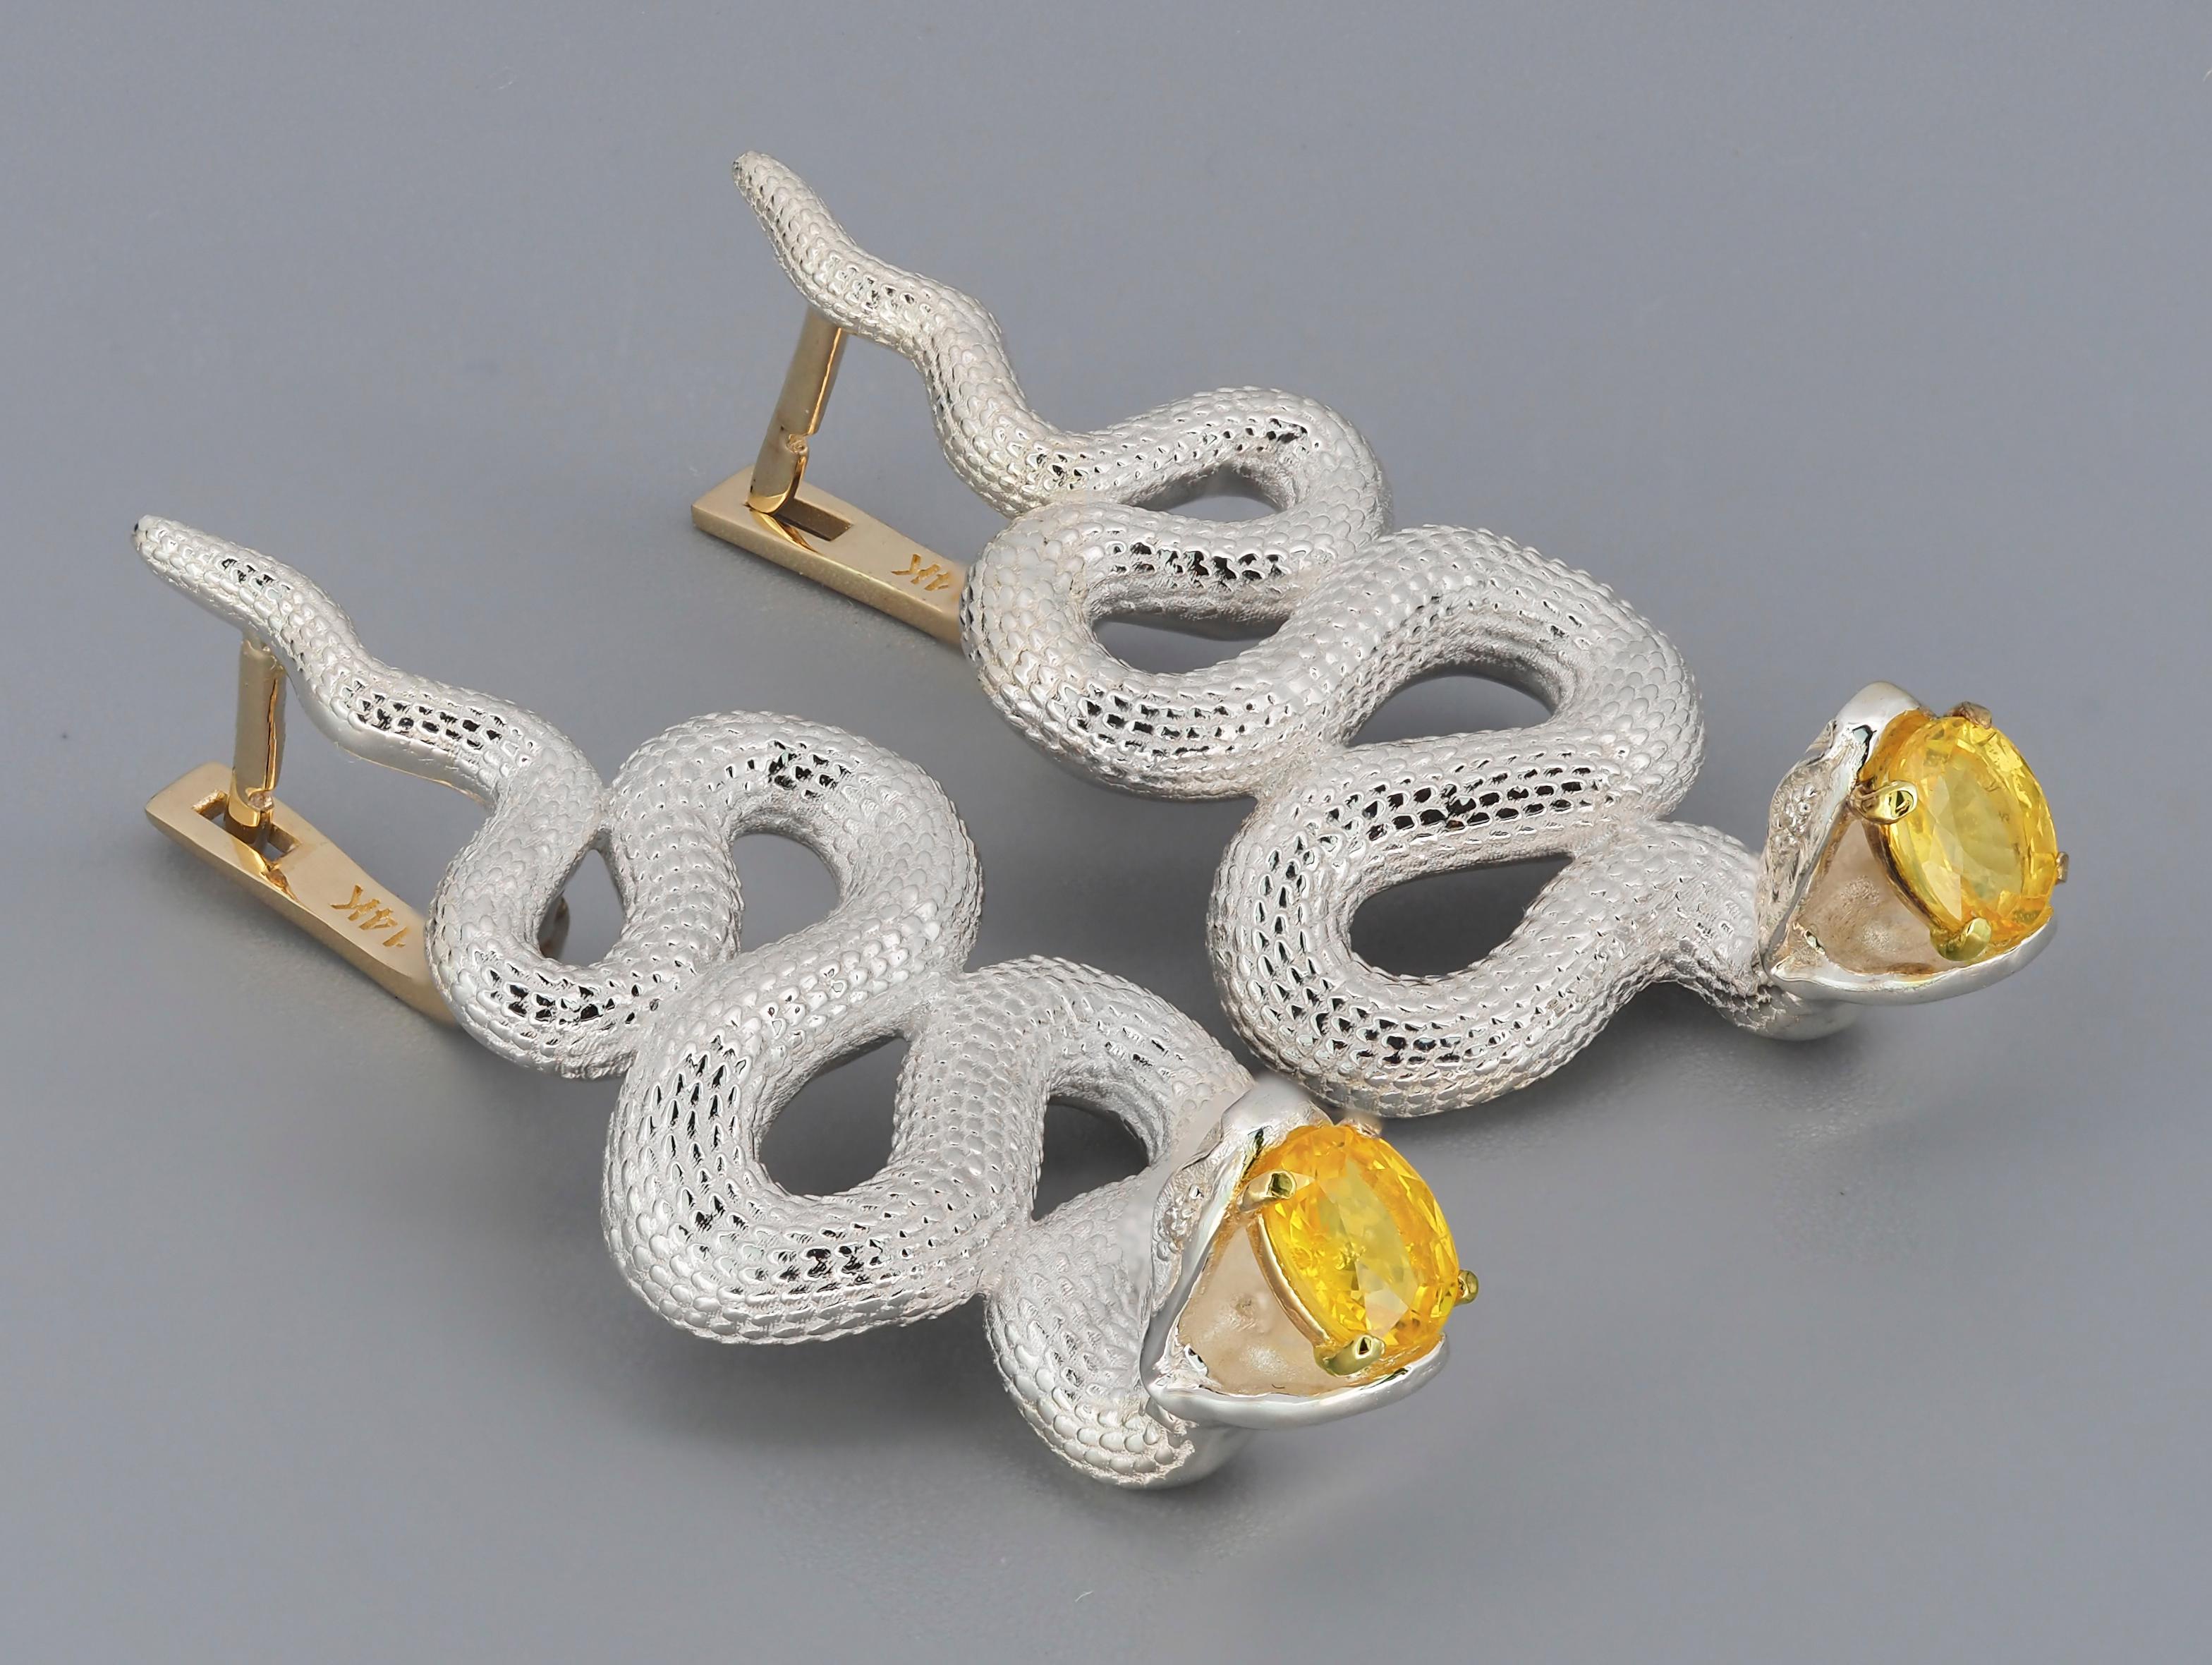 Snake earrings. 
Genuine yellow sapphires earrings. Two metal earrings: gold, silver. Serpent Earrings for Women Large.

Earrings are made with two material: 14 kt yellow gold (1.3 g) - clasp and 925 purity silver - other parts - 12 gr.
Total